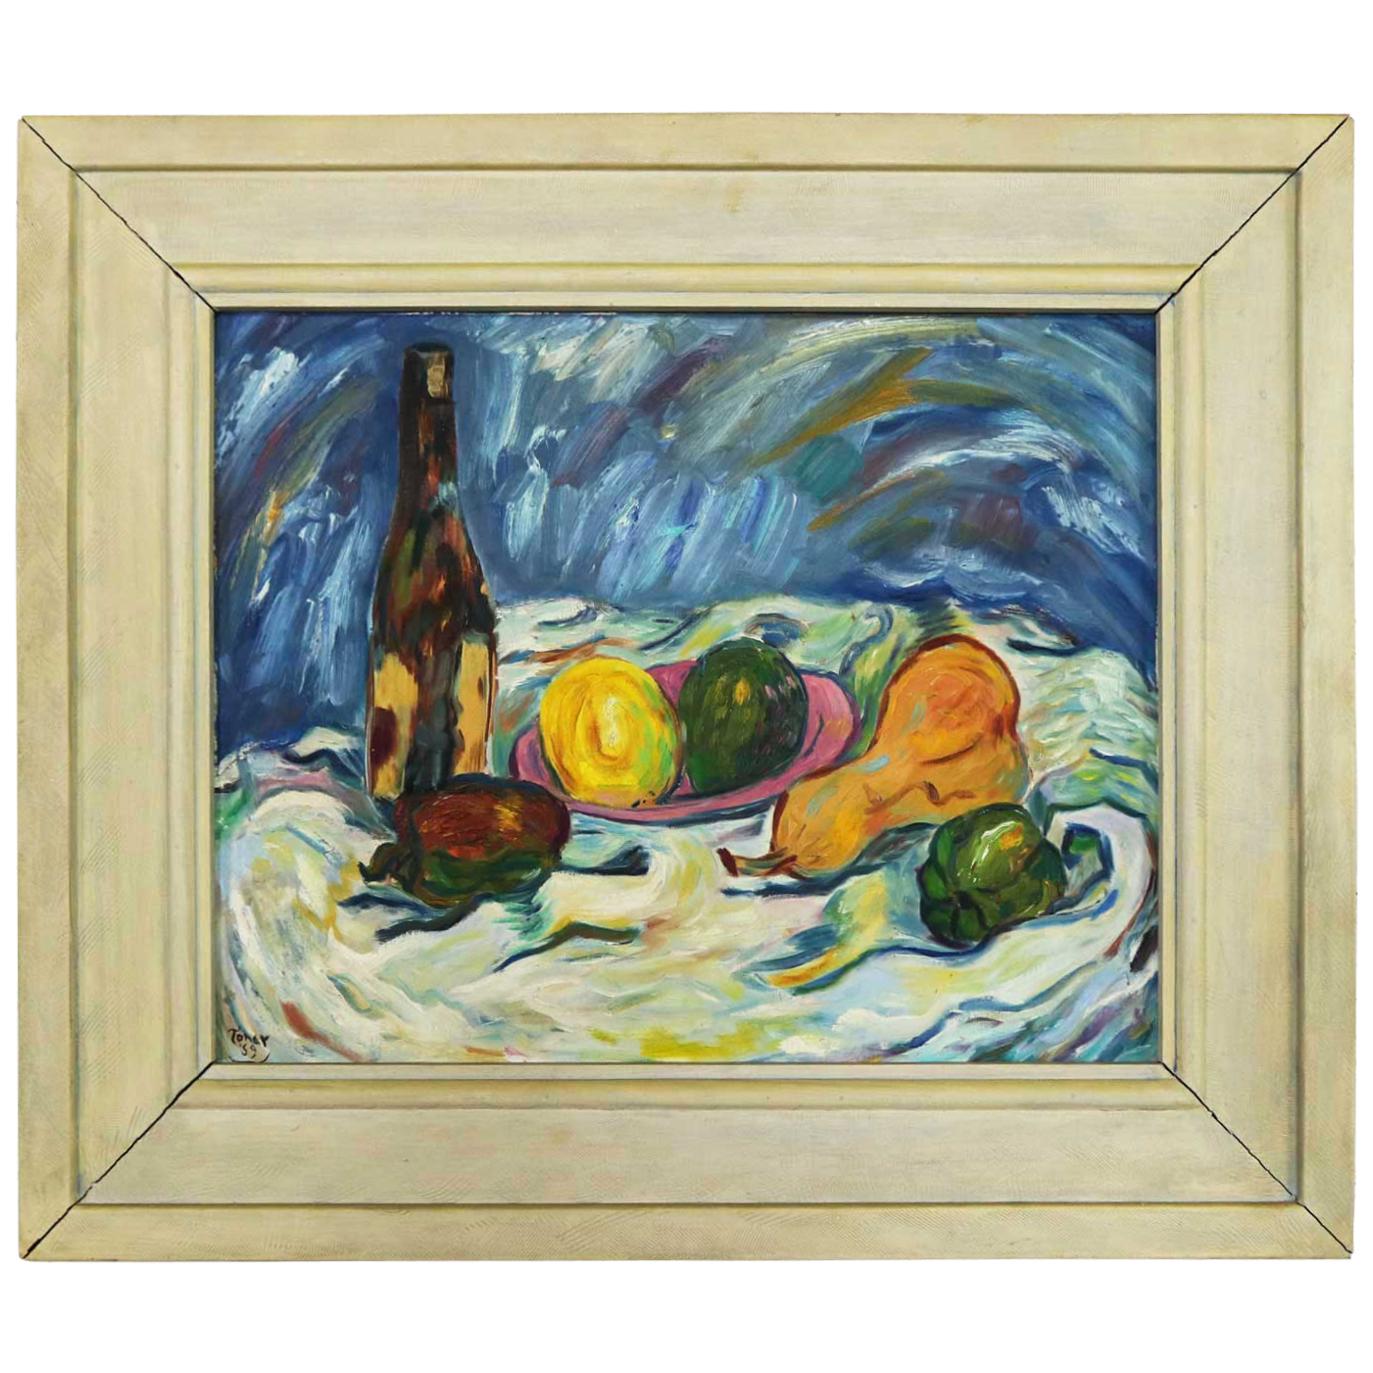 Midcentury Still Life with Fruit and Wine Bottle by Lee Tonar, 1959